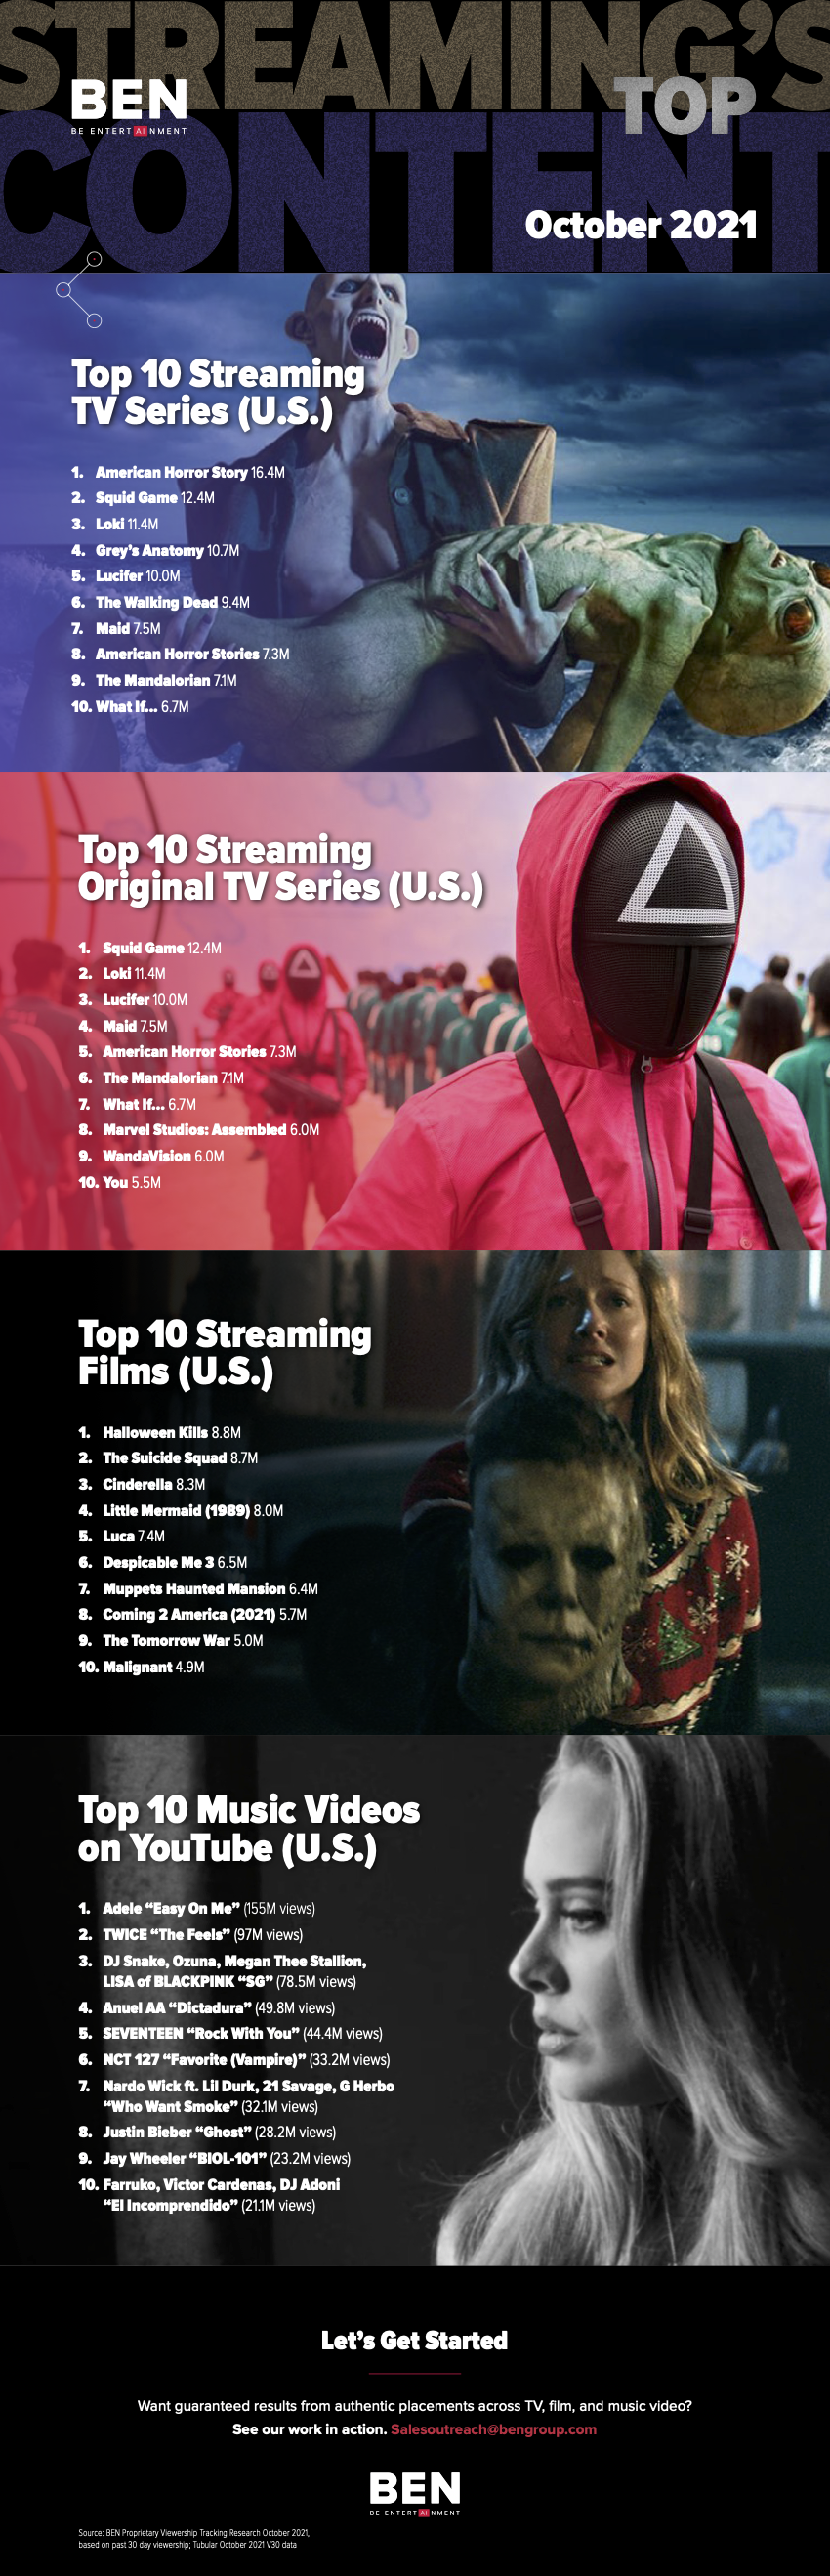 See the Top 10 in streaming TV series, streaming original TV series, streaming films, and music videos on YouTube from October 2021.